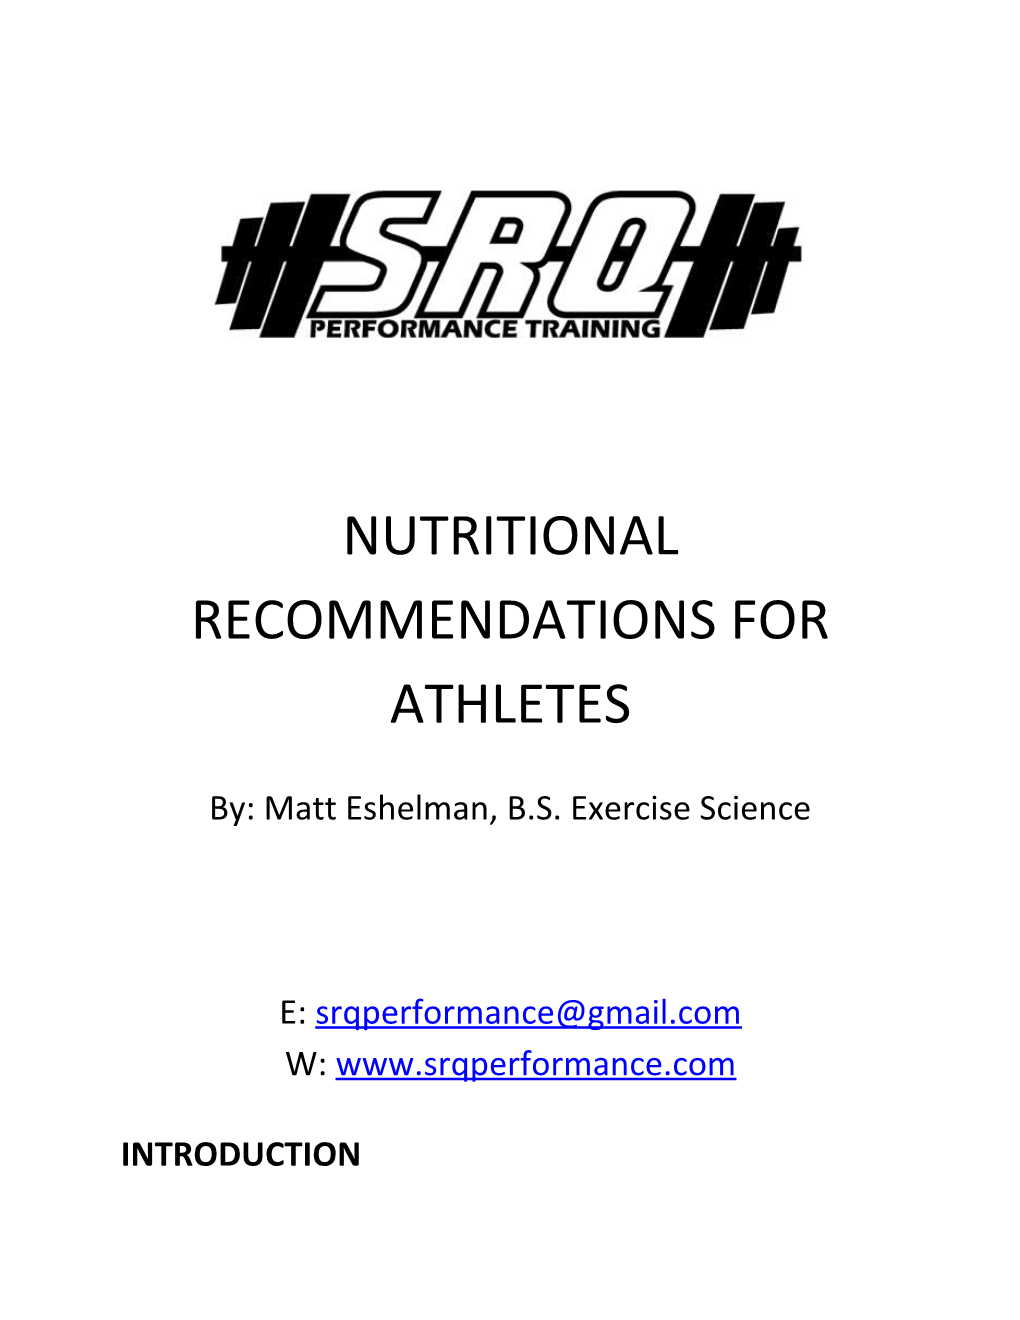 Nutritional Recommendations for Athletes